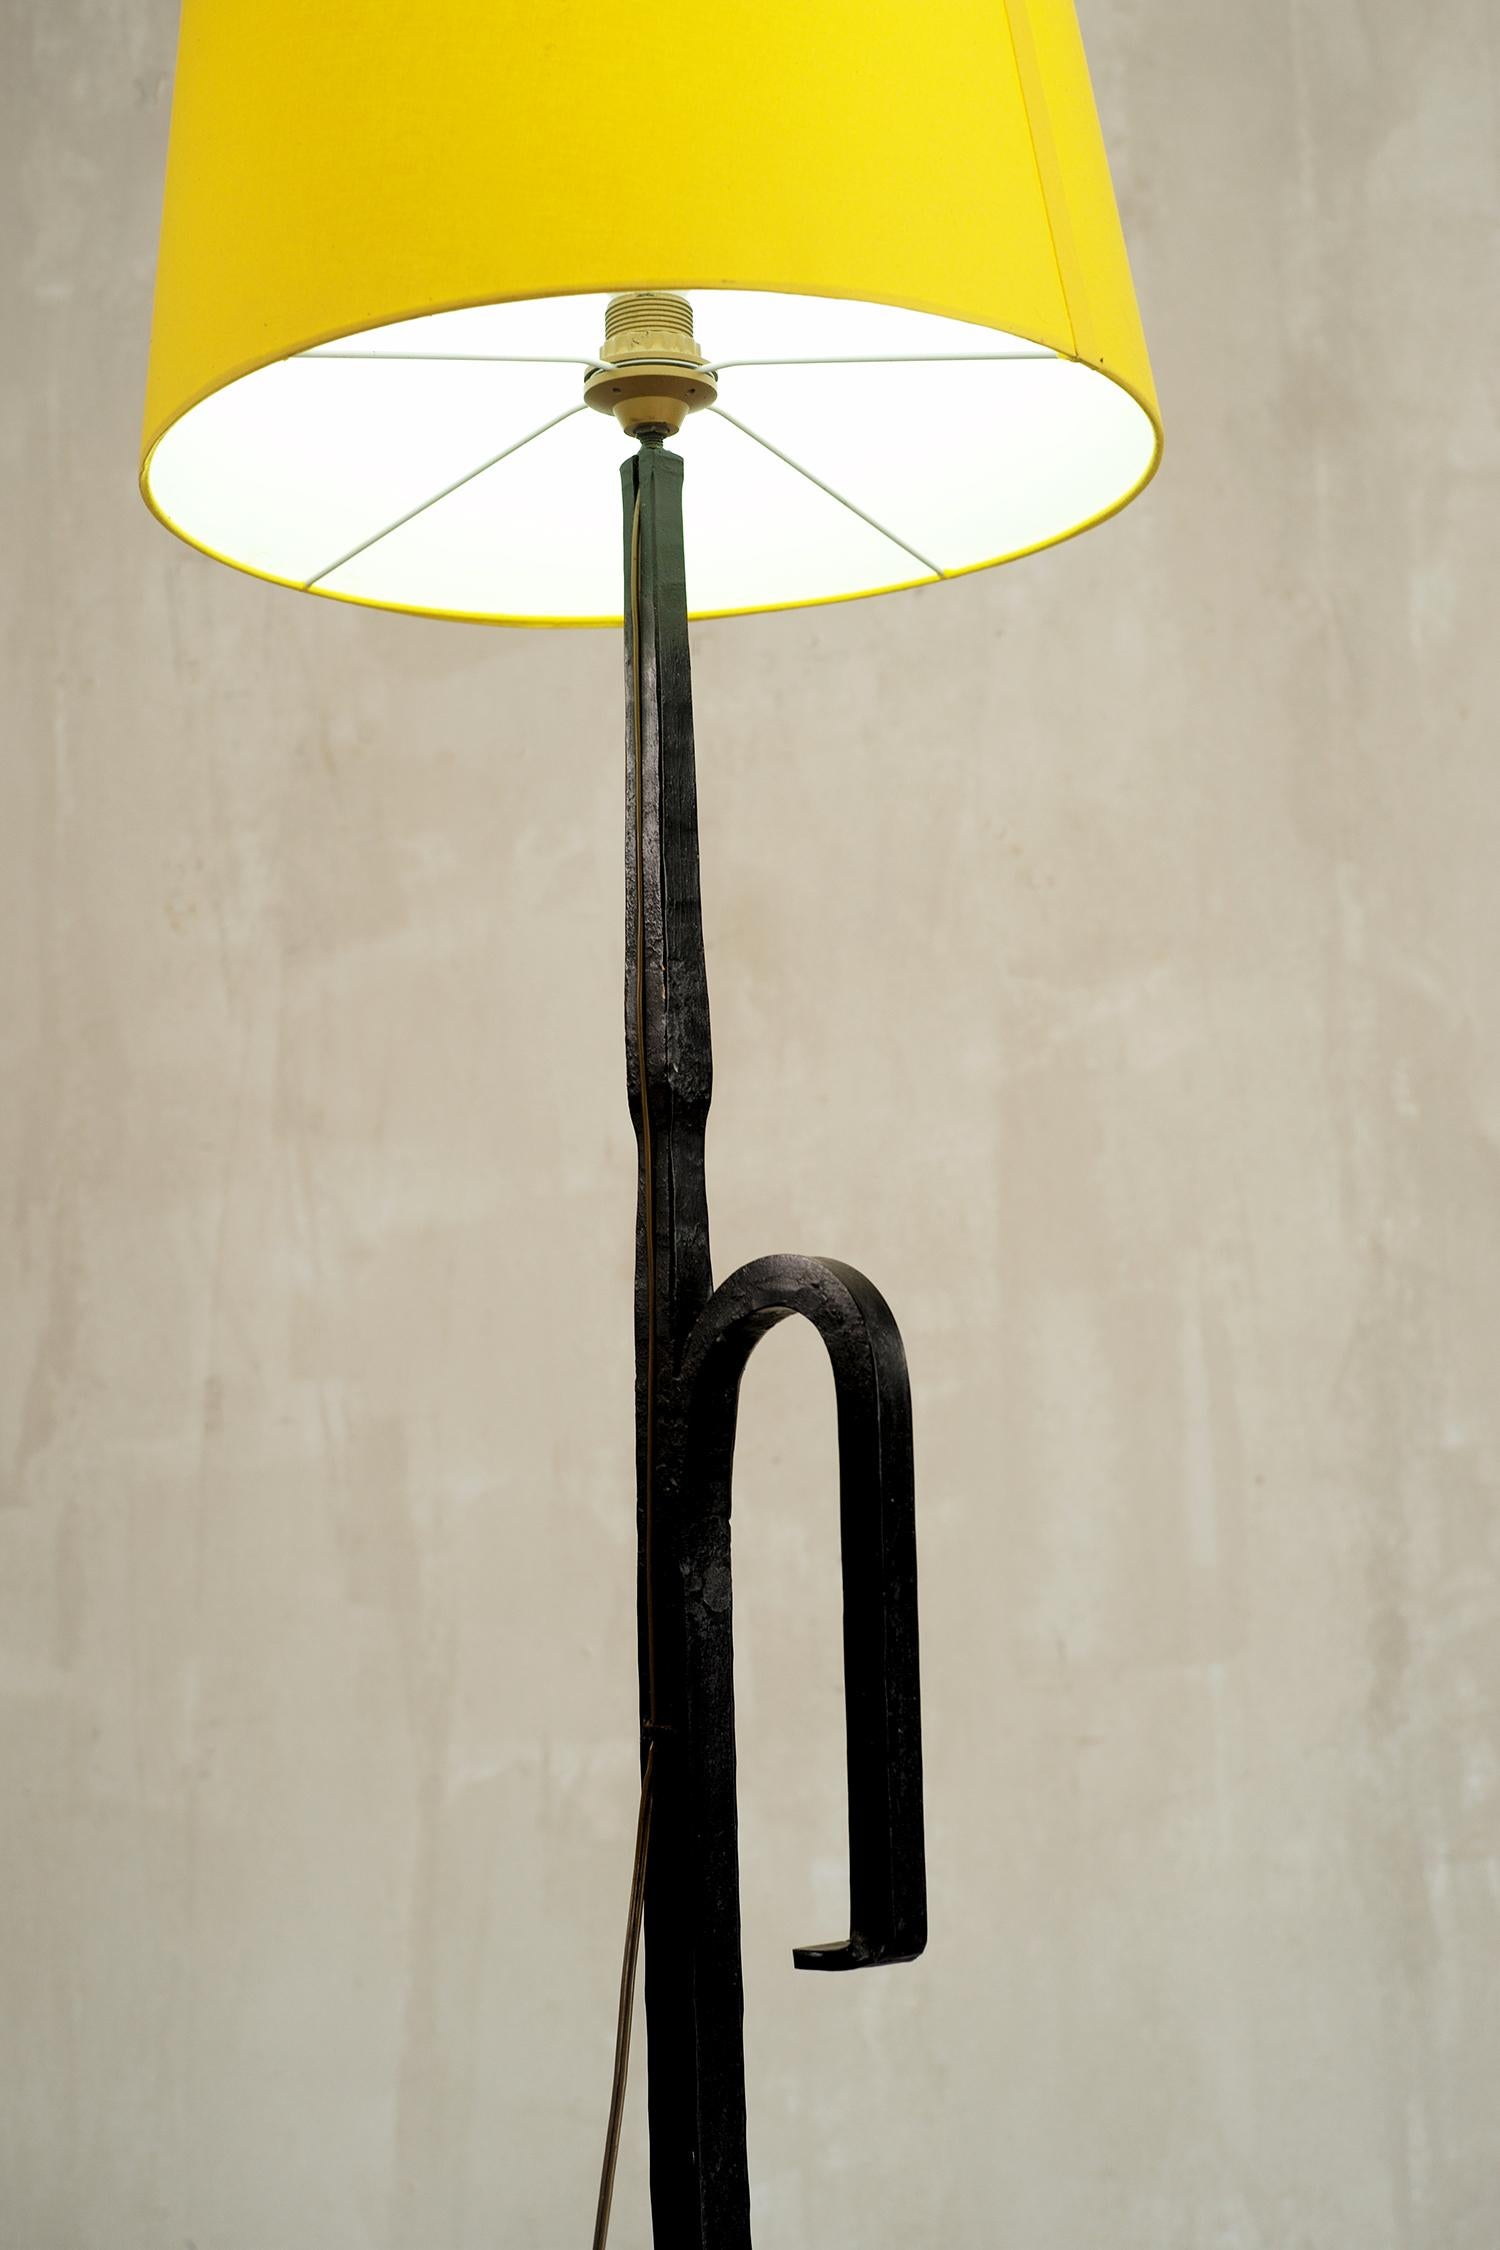 Modernist Floor Lamp in Wrought Iron, France, 1960 For Sale 5